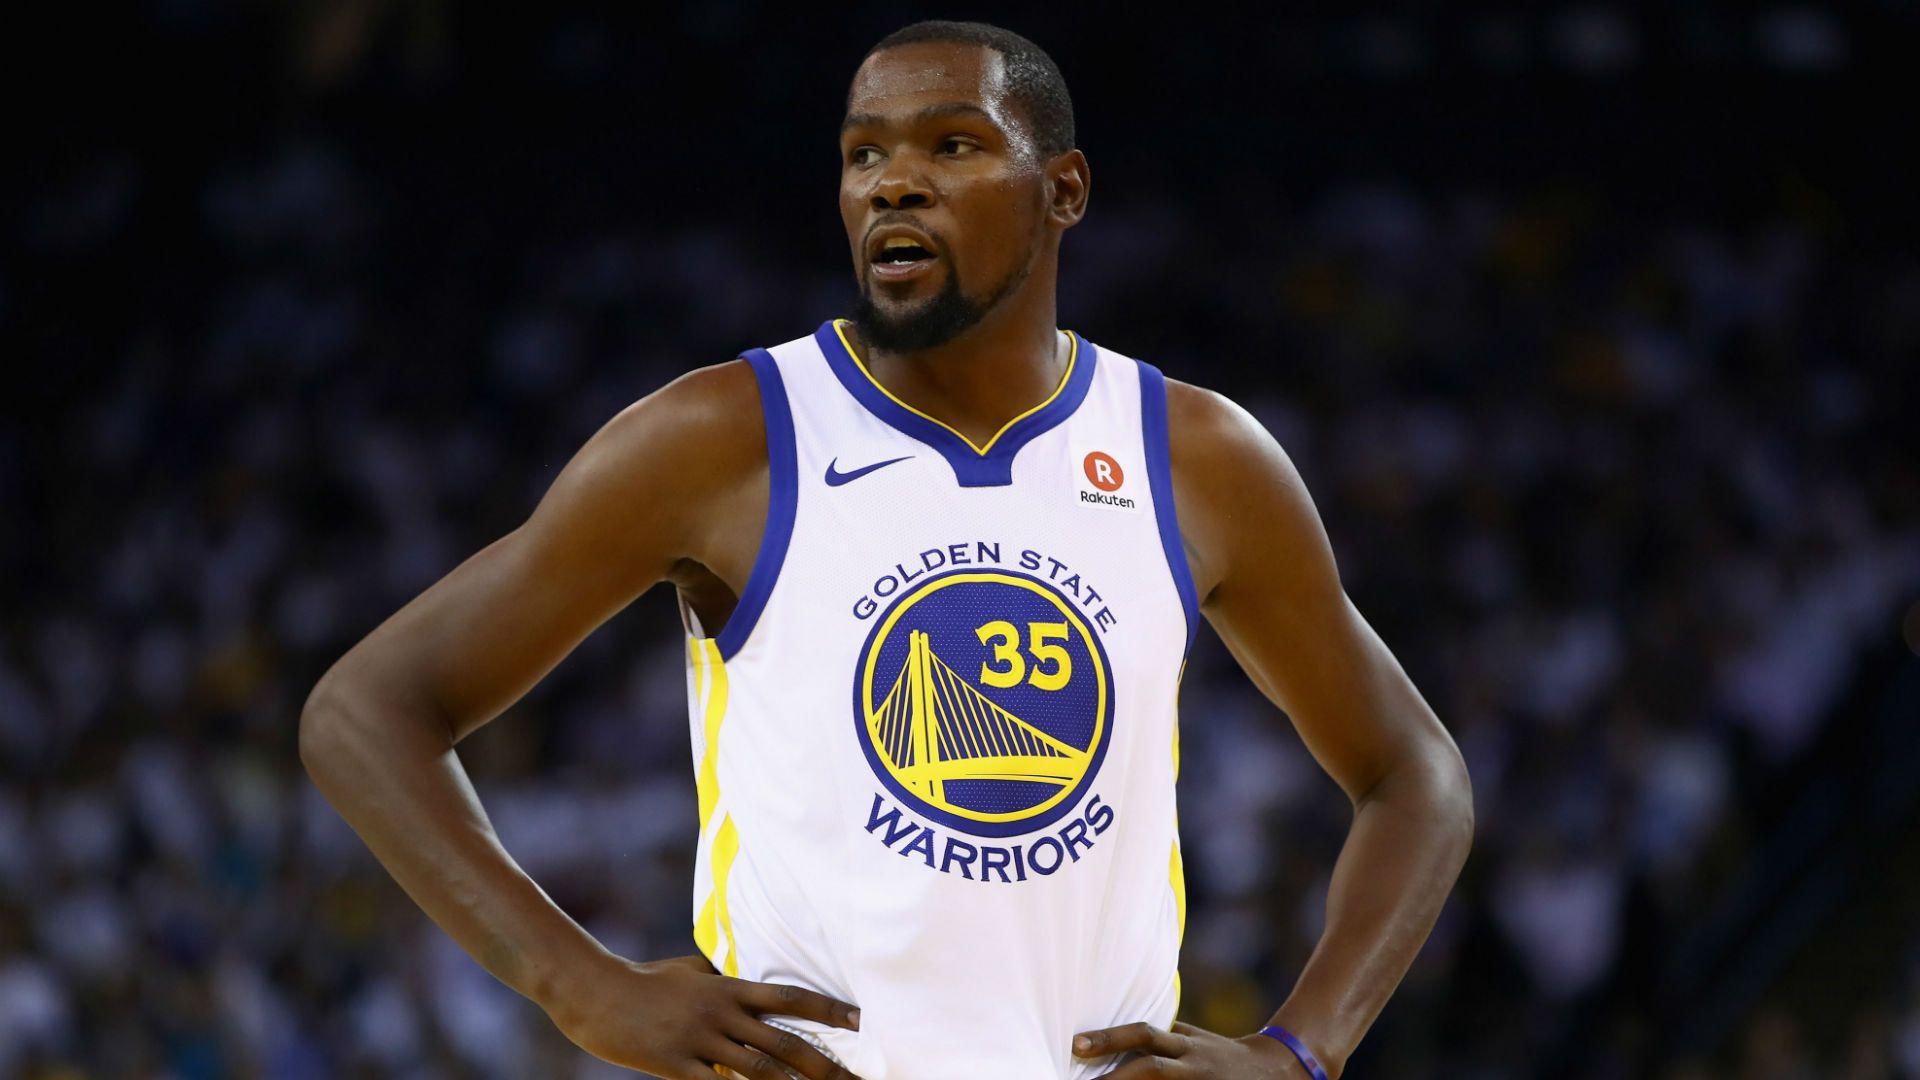 Watch: Kevin Durant Drops F Bomb, Gets Tossed From Game